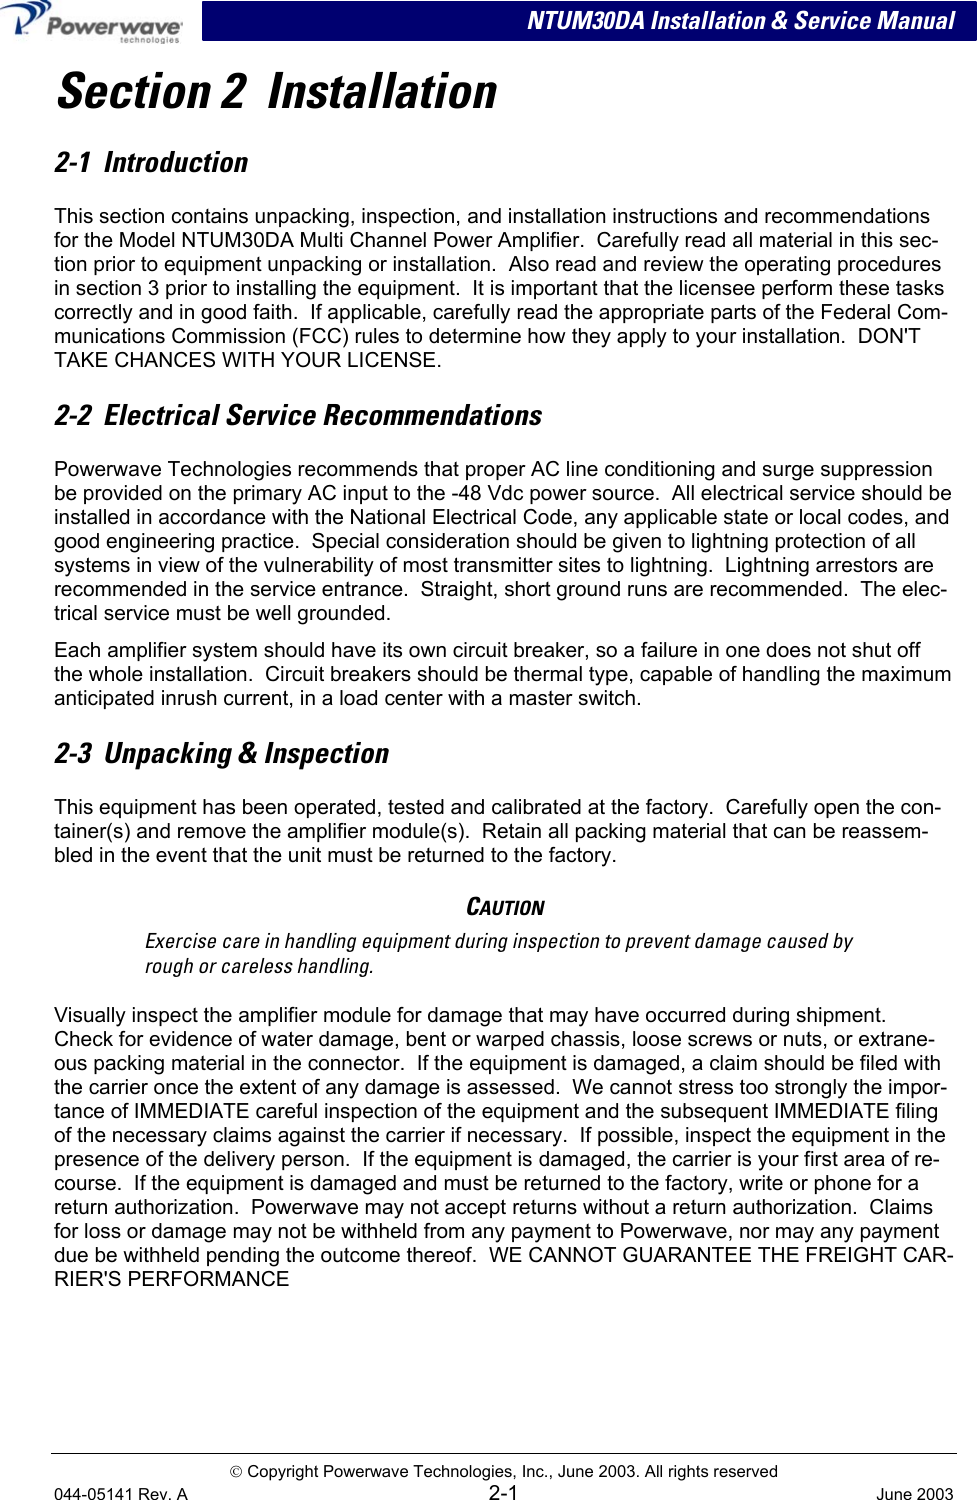  NTUM30DA Installation &amp; Service Manual Section 2  Installation 2-1  Introduction This section contains unpacking, inspection, and installation instructions and recommendations for the Model NTUM30DA Multi Channel Power Amplifier.  Carefully read all material in this sec-tion prior to equipment unpacking or installation.  Also read and review the operating procedures in section 3 prior to installing the equipment.  It is important that the licensee perform these tasks correctly and in good faith.  If applicable, carefully read the appropriate parts of the Federal Com-munications Commission (FCC) rules to determine how they apply to your installation.  DON&apos;T TAKE CHANCES WITH YOUR LICENSE. 2-2  Electrical Service Recommendations Powerwave Technologies recommends that proper AC line conditioning and surge suppression be provided on the primary AC input to the -48 Vdc power source.  All electrical service should be installed in accordance with the National Electrical Code, any applicable state or local codes, and good engineering practice.  Special consideration should be given to lightning protection of all systems in view of the vulnerability of most transmitter sites to lightning.  Lightning arrestors are recommended in the service entrance.  Straight, short ground runs are recommended.  The elec-trical service must be well grounded. Each amplifier system should have its own circuit breaker, so a failure in one does not shut off the whole installation.  Circuit breakers should be thermal type, capable of handling the maximum anticipated inrush current, in a load center with a master switch. 2-3  Unpacking &amp; Inspection This equipment has been operated, tested and calibrated at the factory.  Carefully open the con-tainer(s) and remove the amplifier module(s).  Retain all packing material that can be reassem-bled in the event that the unit must be returned to the factory. CAUTION Exercise care in handling equipment during inspection to prevent damage caused by rough or careless handling. Visually inspect the amplifier module for damage that may have occurred during shipment.  Check for evidence of water damage, bent or warped chassis, loose screws or nuts, or extrane-ous packing material in the connector.  If the equipment is damaged, a claim should be filed with the carrier once the extent of any damage is assessed.  We cannot stress too strongly the impor-tance of IMMEDIATE careful inspection of the equipment and the subsequent IMMEDIATE filing of the necessary claims against the carrier if necessary.  If possible, inspect the equipment in the presence of the delivery person.  If the equipment is damaged, the carrier is your first area of re-course.  If the equipment is damaged and must be returned to the factory, write or phone for a return authorization.  Powerwave may not accept returns without a return authorization.  Claims for loss or damage may not be withheld from any payment to Powerwave, nor may any payment due be withheld pending the outcome thereof.  WE CANNOT GUARANTEE THE FREIGHT CAR-RIER&apos;S PERFORMANCE  Copyright Powerwave Technologies, Inc., June 2003. All rights reserved 044-05141 Rev. A 2-1  June 2003 